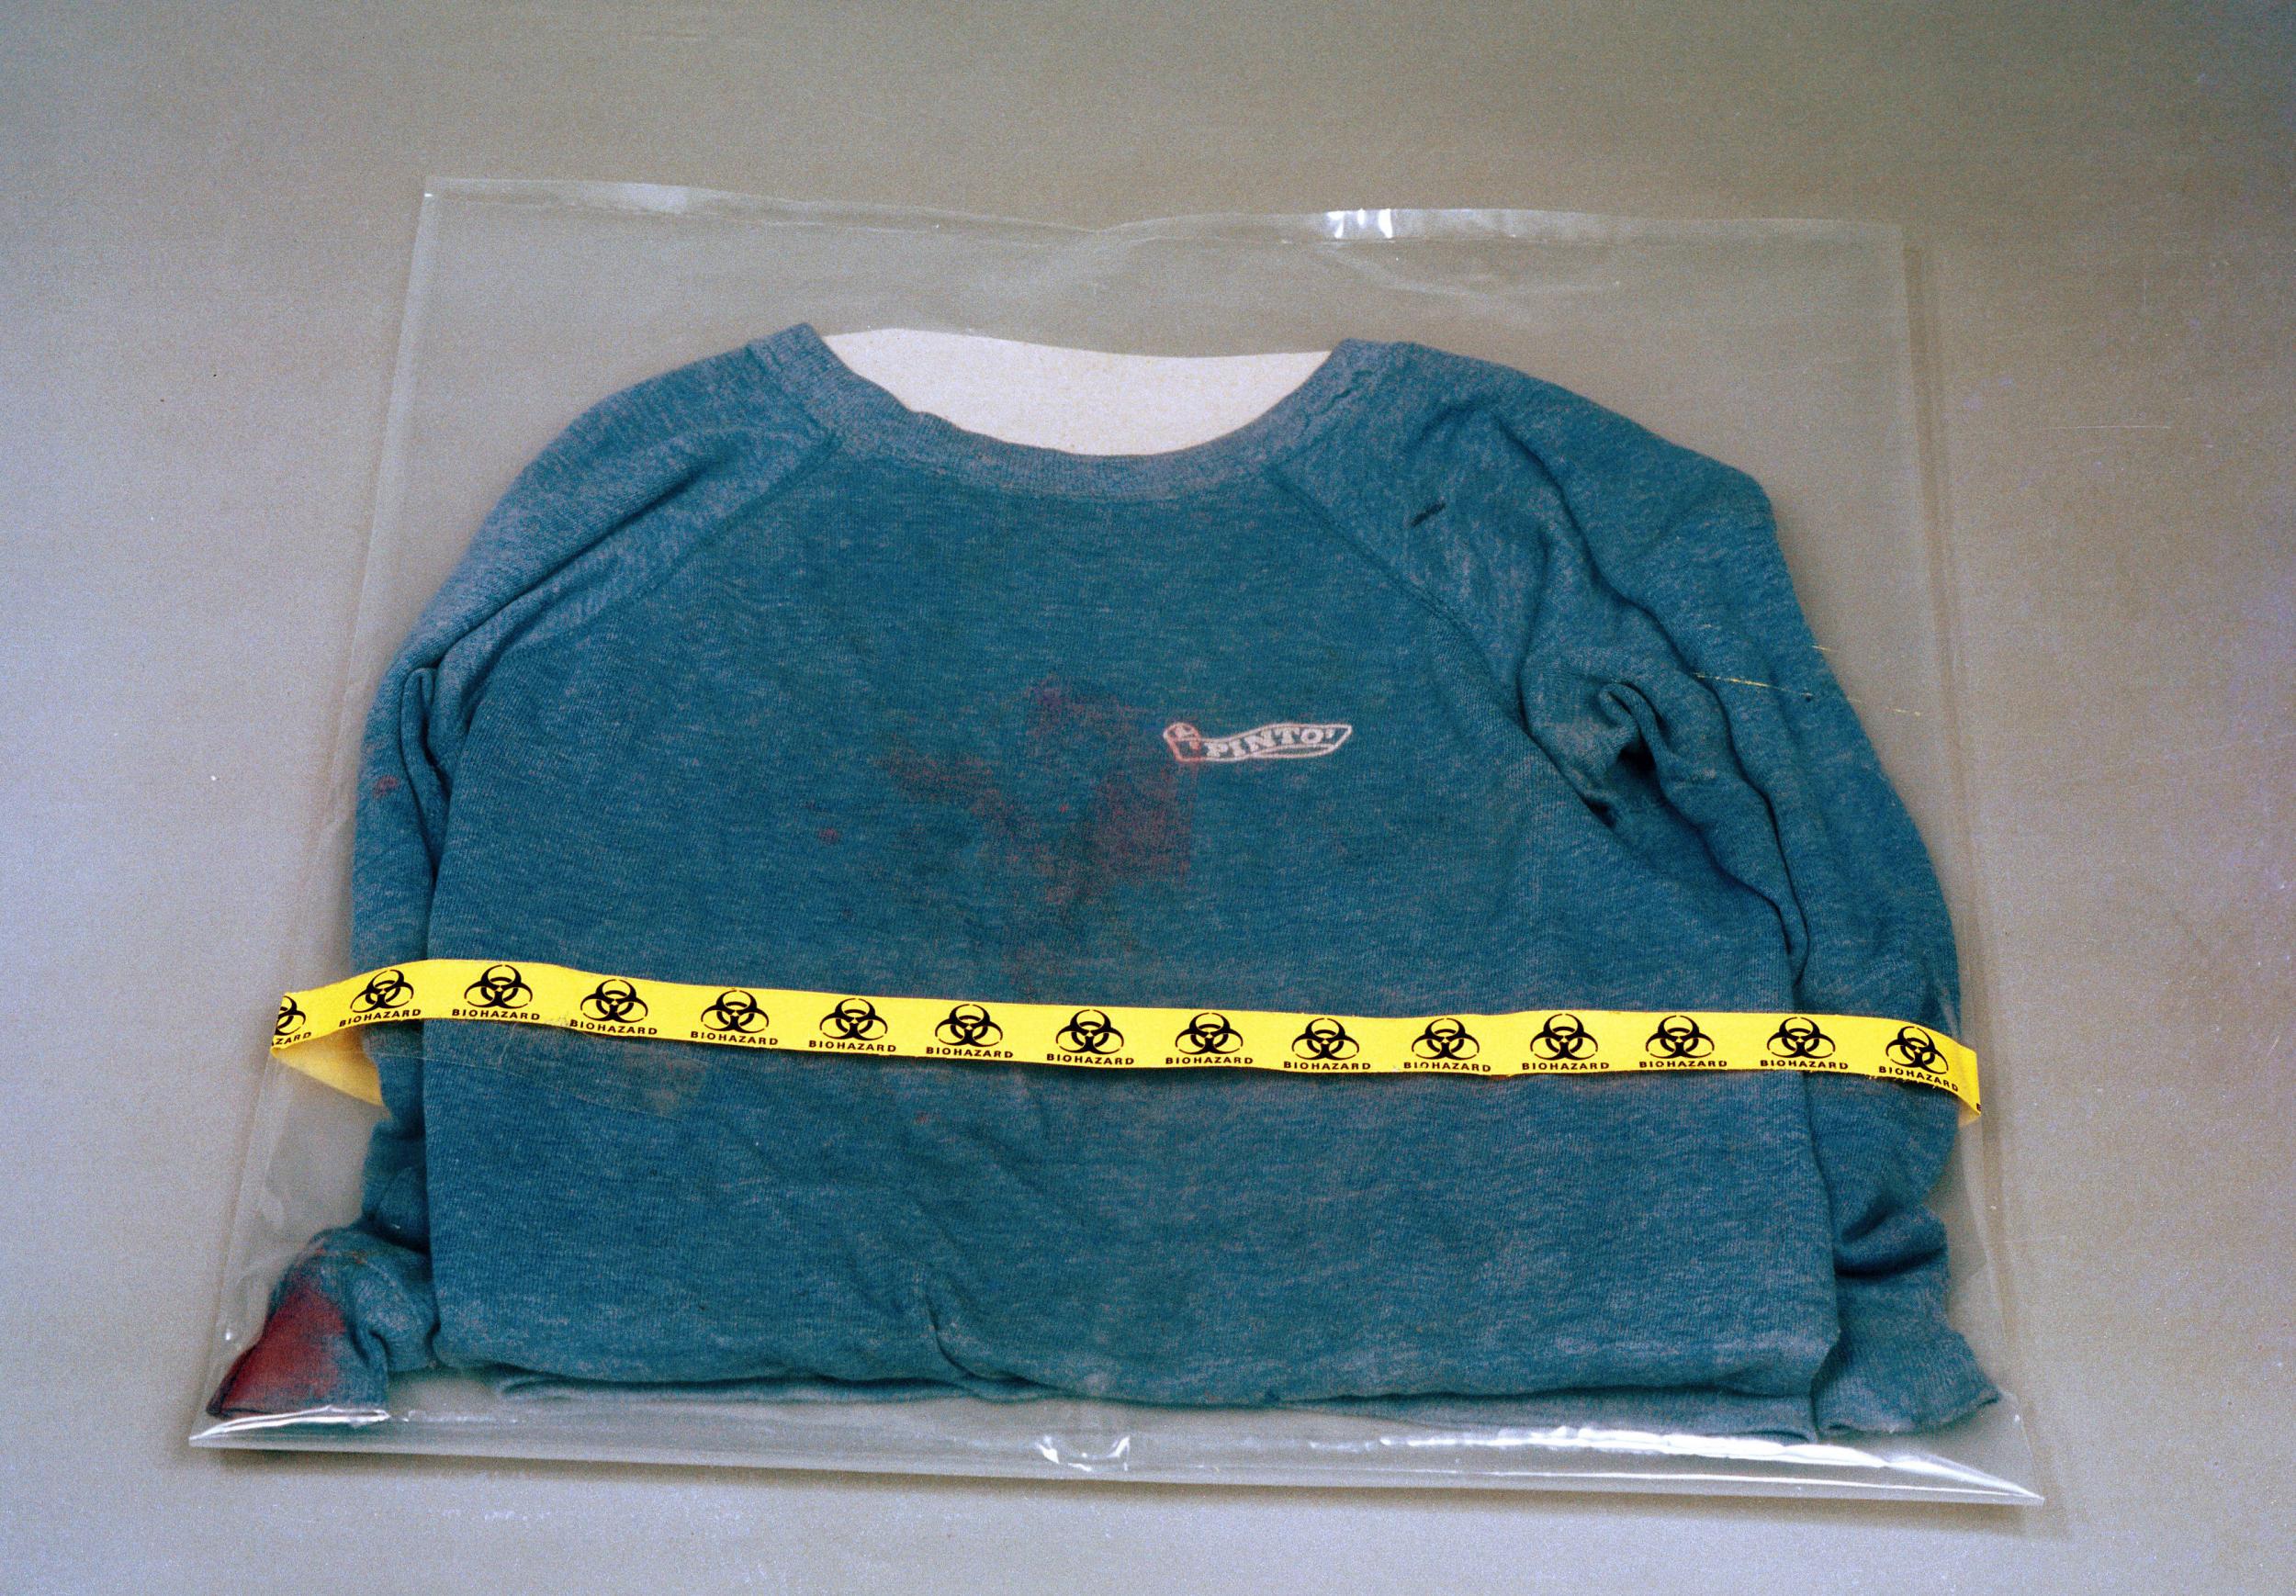 The police were convinced that this Pinto-branded sweatshirt, discarded on the night of the murders, contained forensic proof that Bishop was the killer